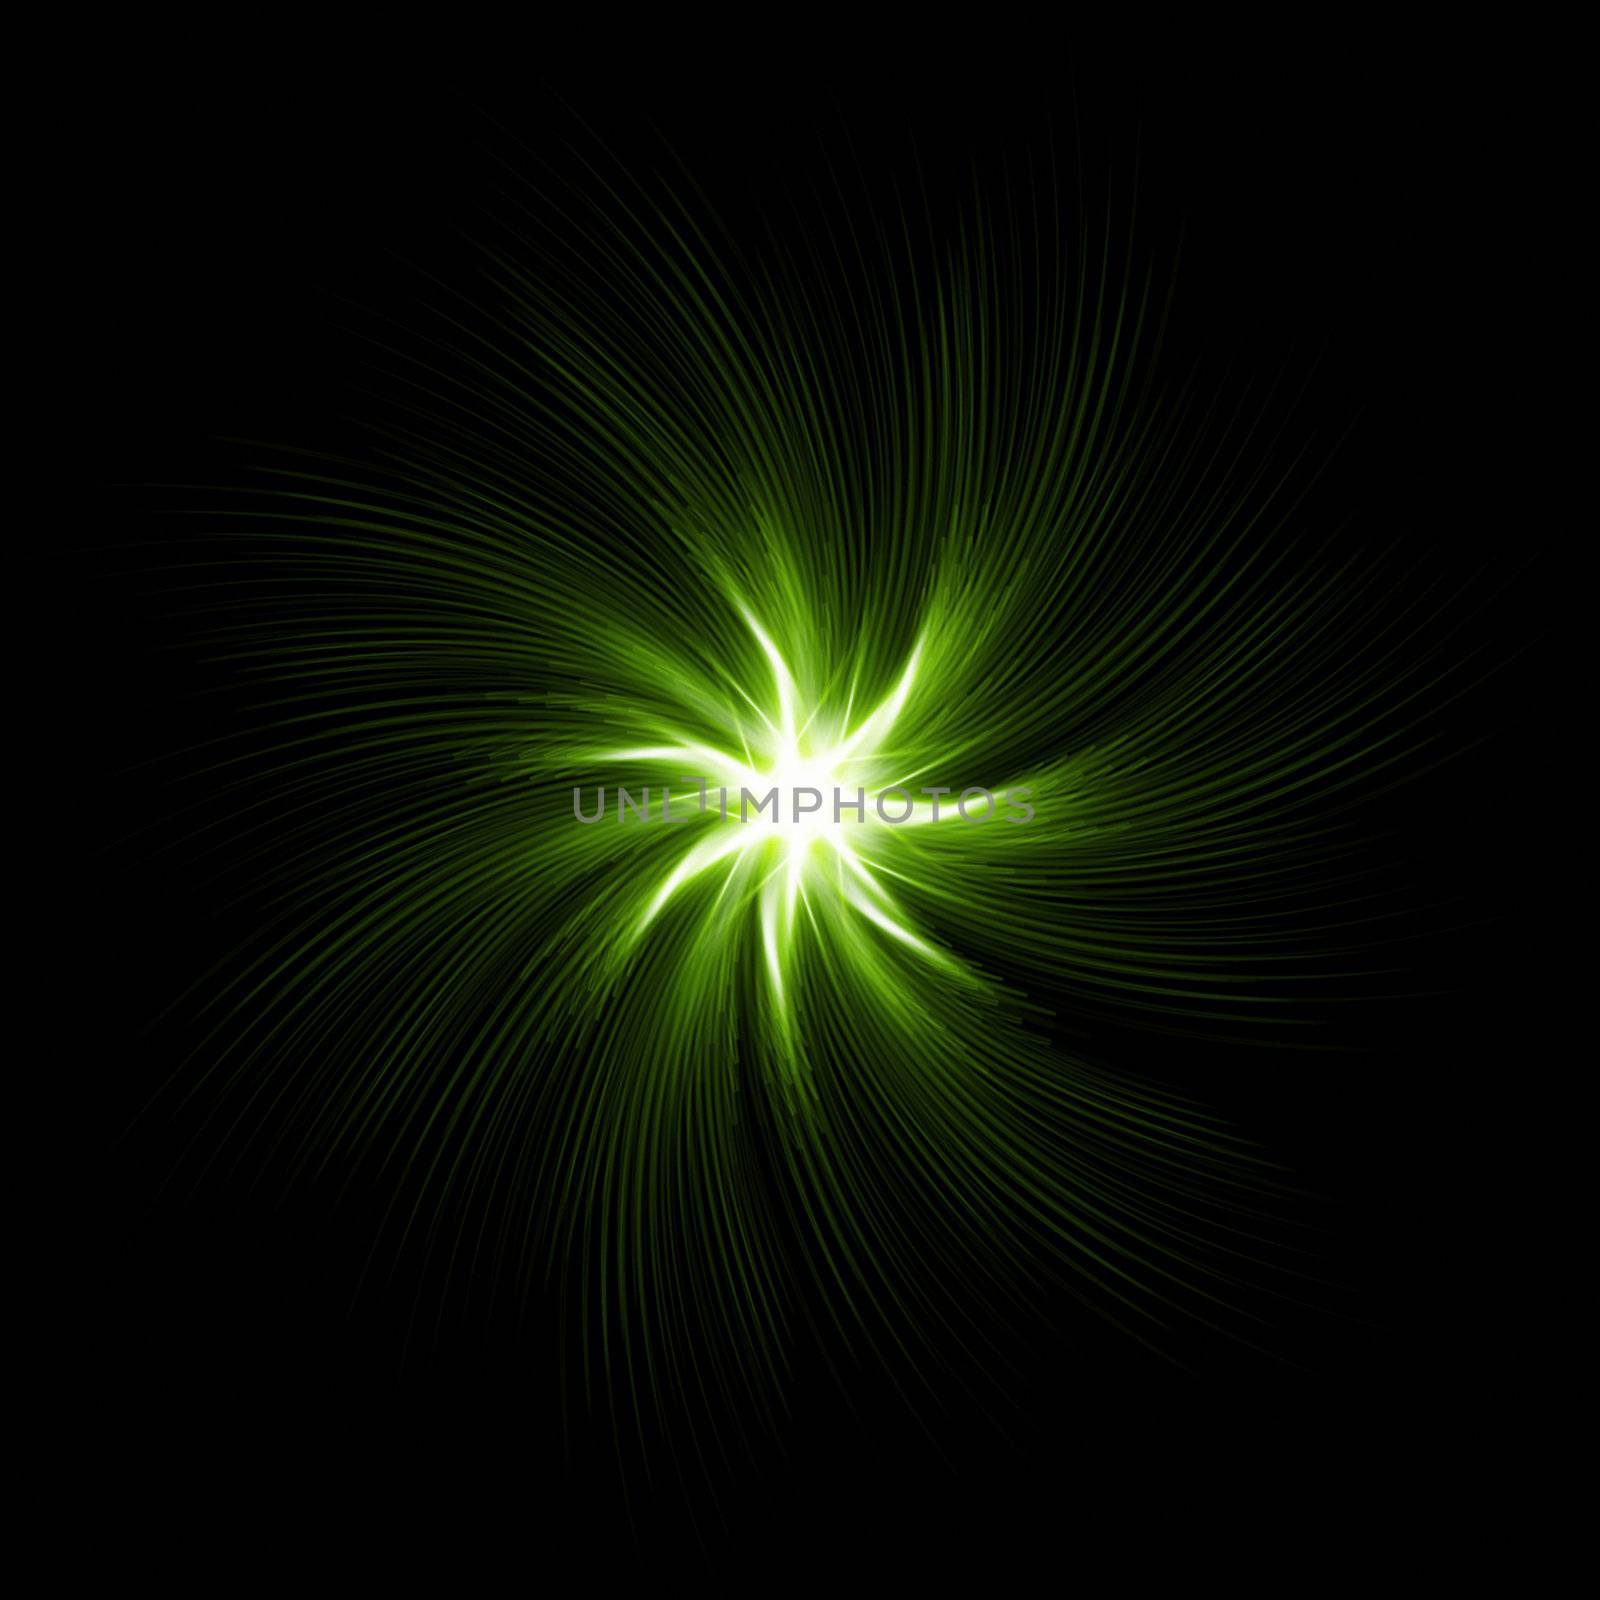 abstract star with green shining spirals over dark background